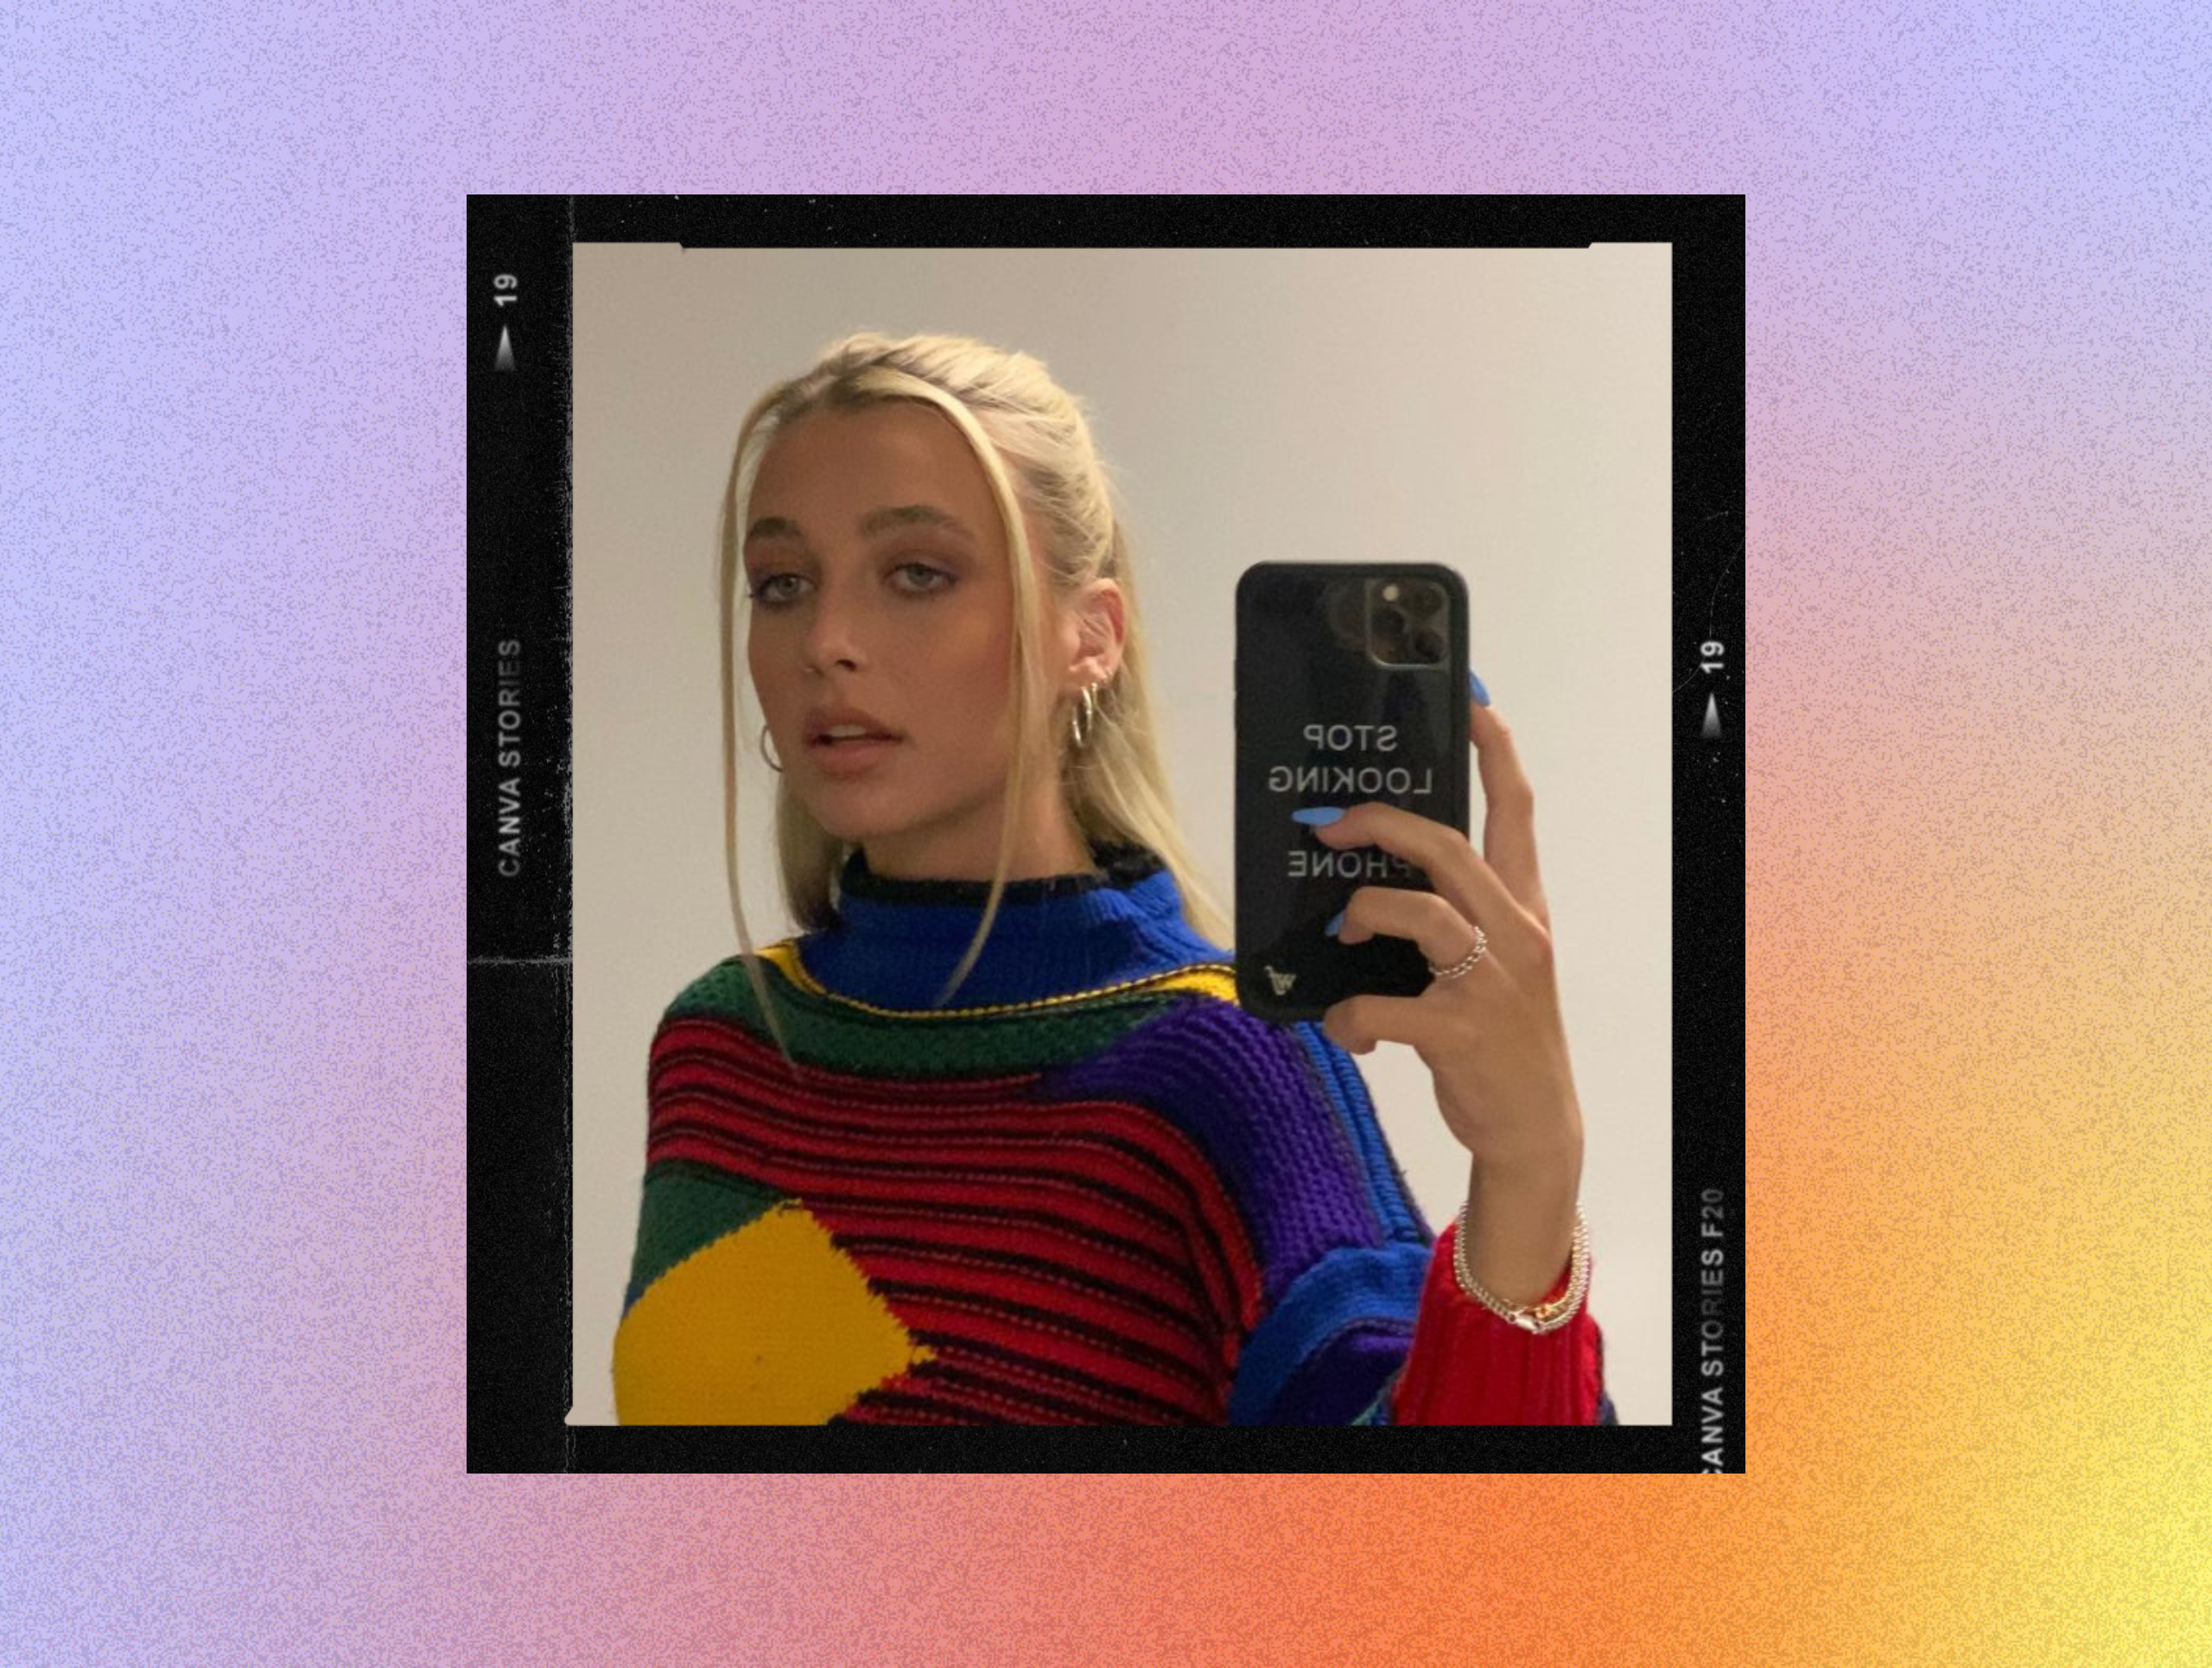 Emma Chamberlain's Style: See What the r Wore to NYFW